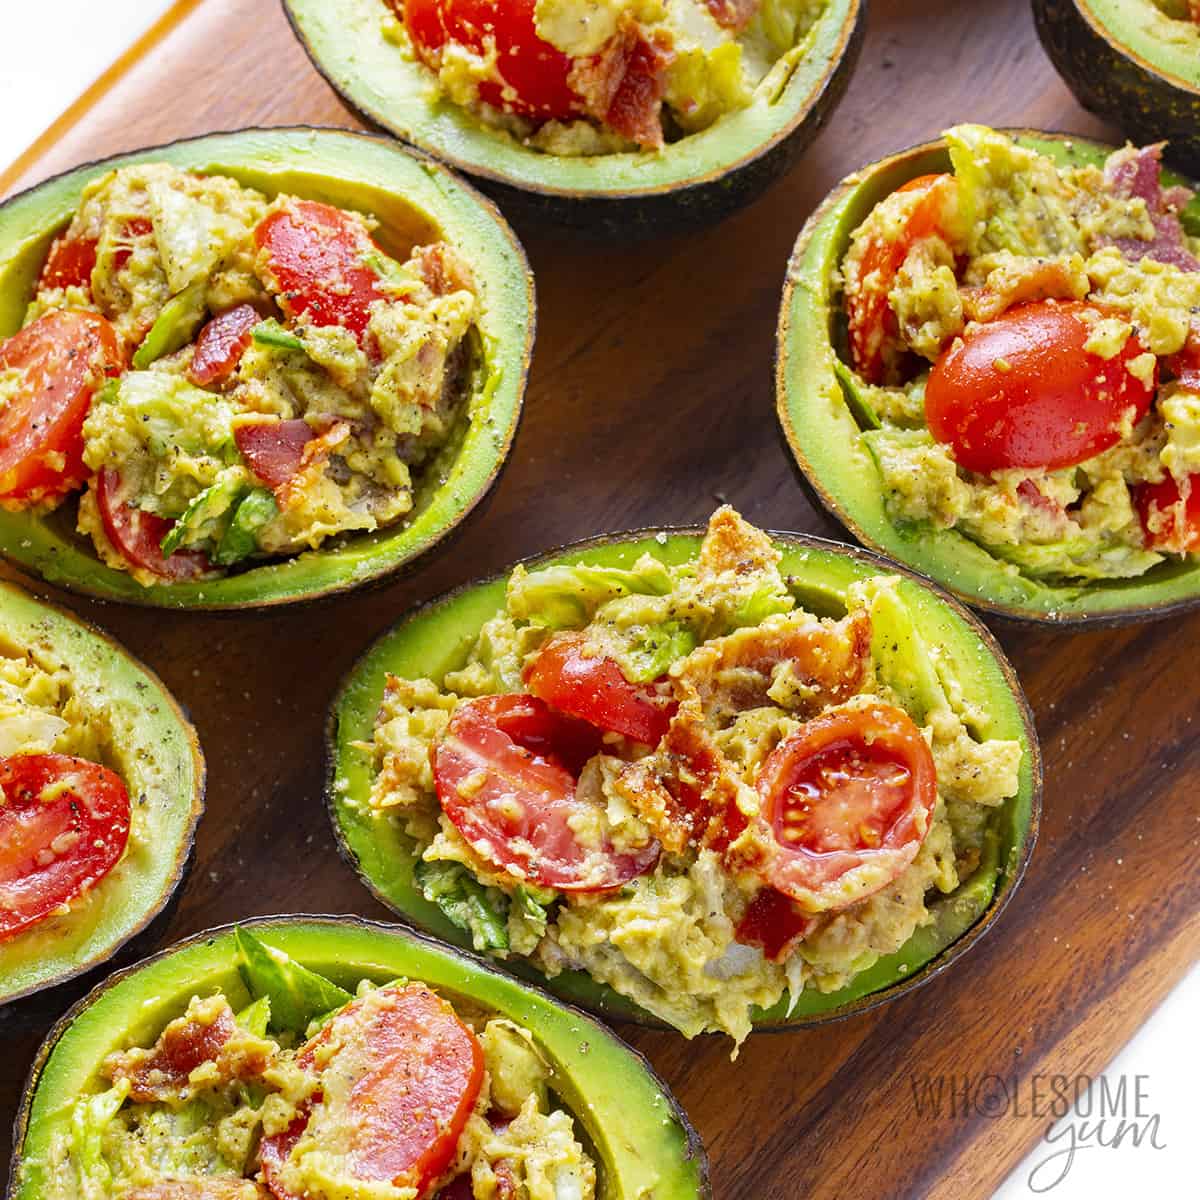 Avocados stuffed with filling.